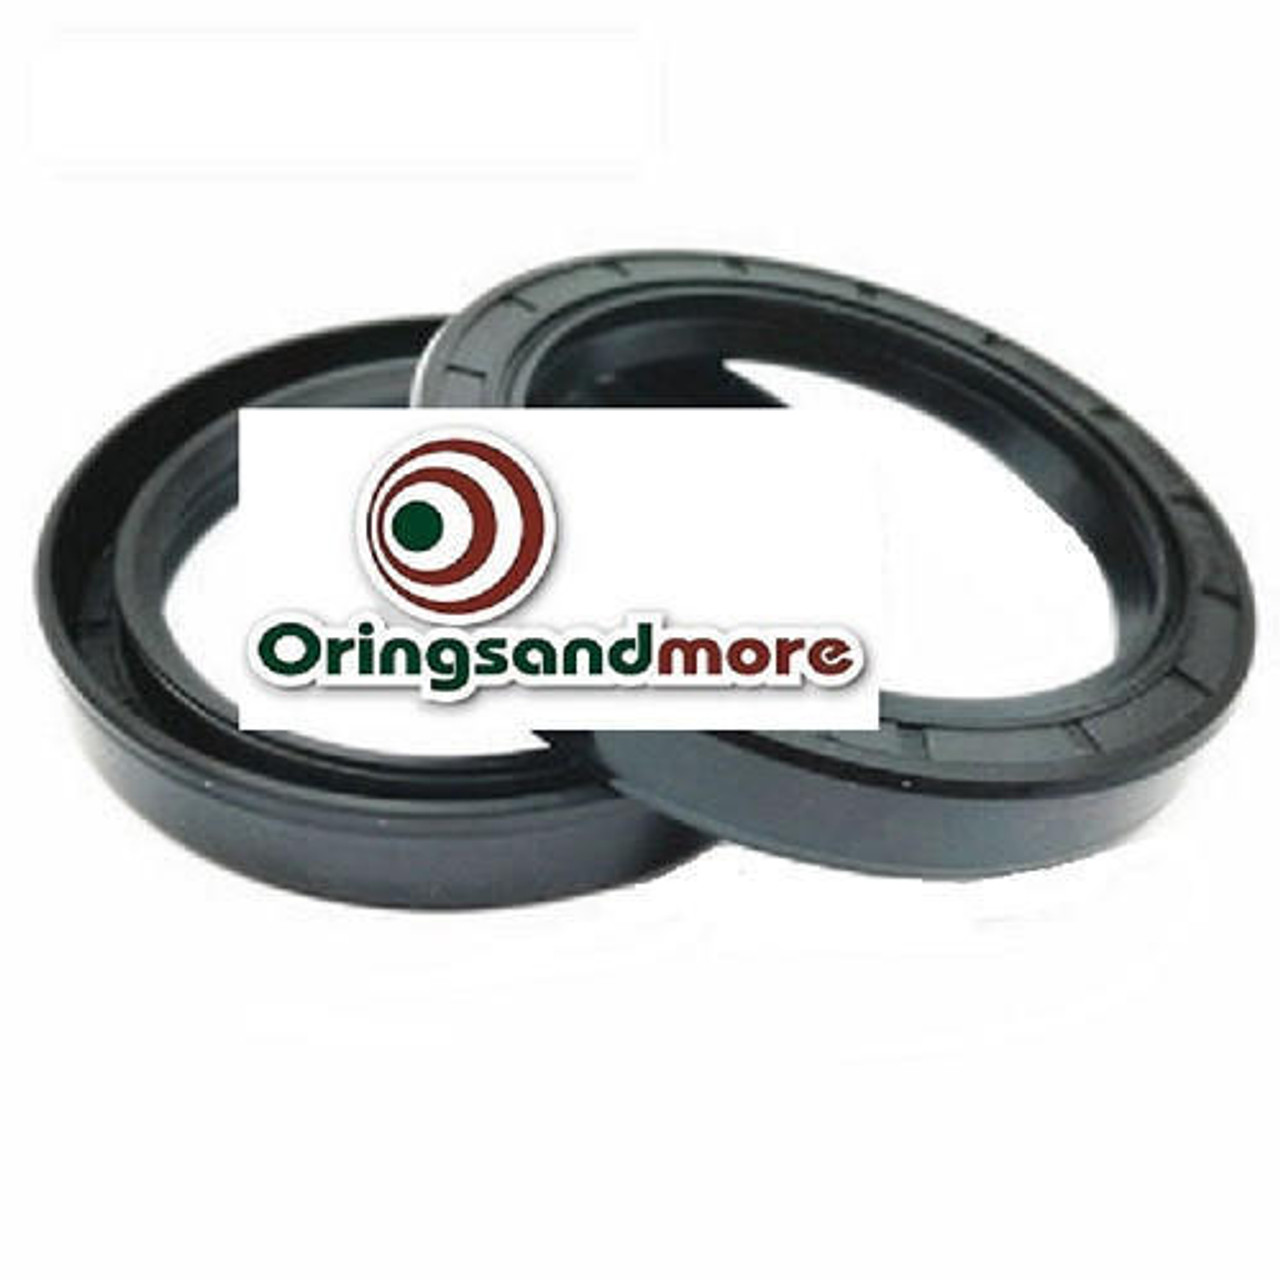 Metric Oil Shaft Seal 64 x 85 x 10mm Double Lip   Price for 1 pc